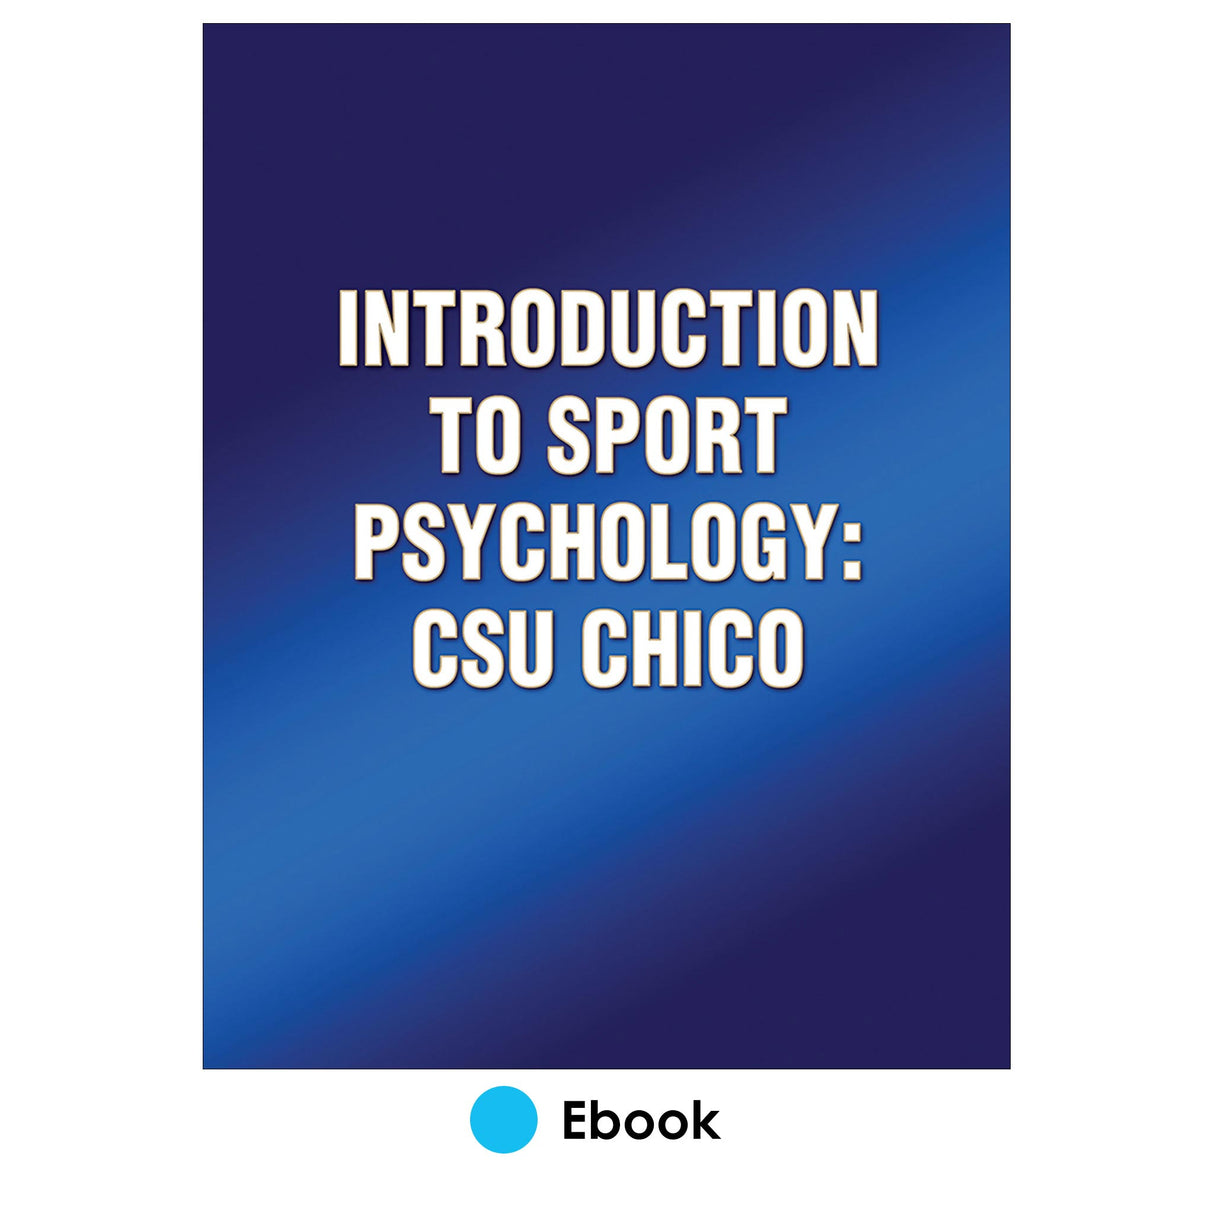 Introduction to Sport Psychology: CSU Chico